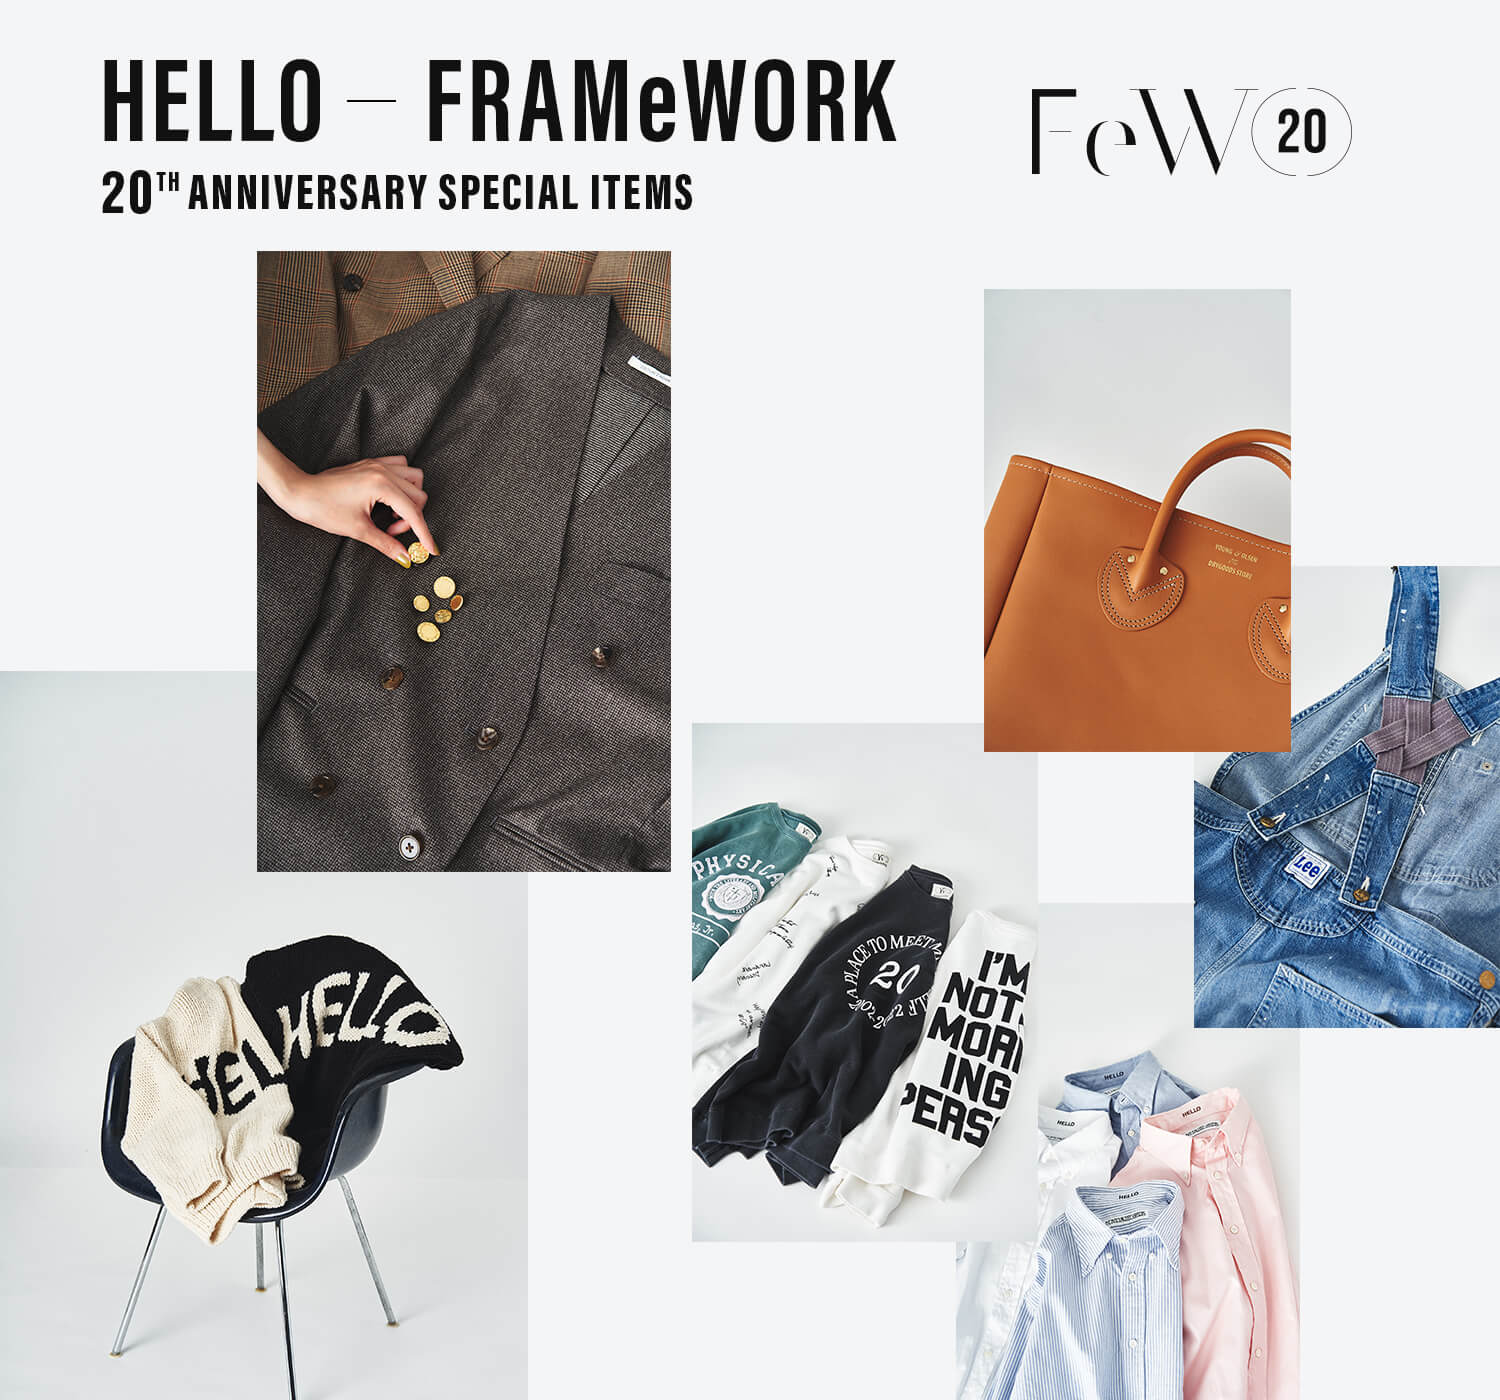 “HELLO FRAMeWORK” 20TH ANNIVERSARY SPECIAL ITEMS ...